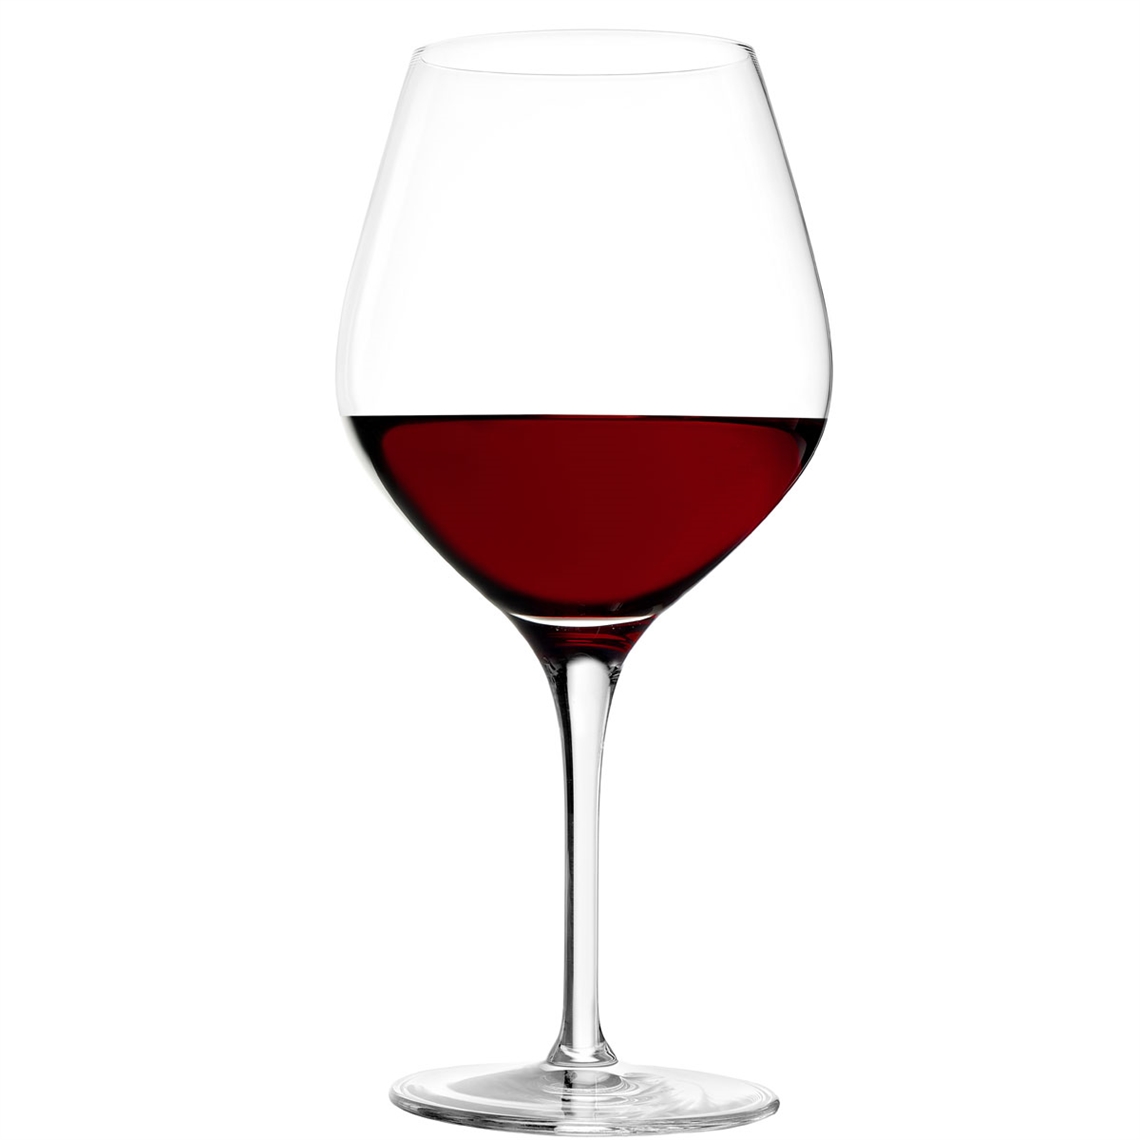 Stolzle Exquisit Burgundy Red Wine Glass - Set of 6